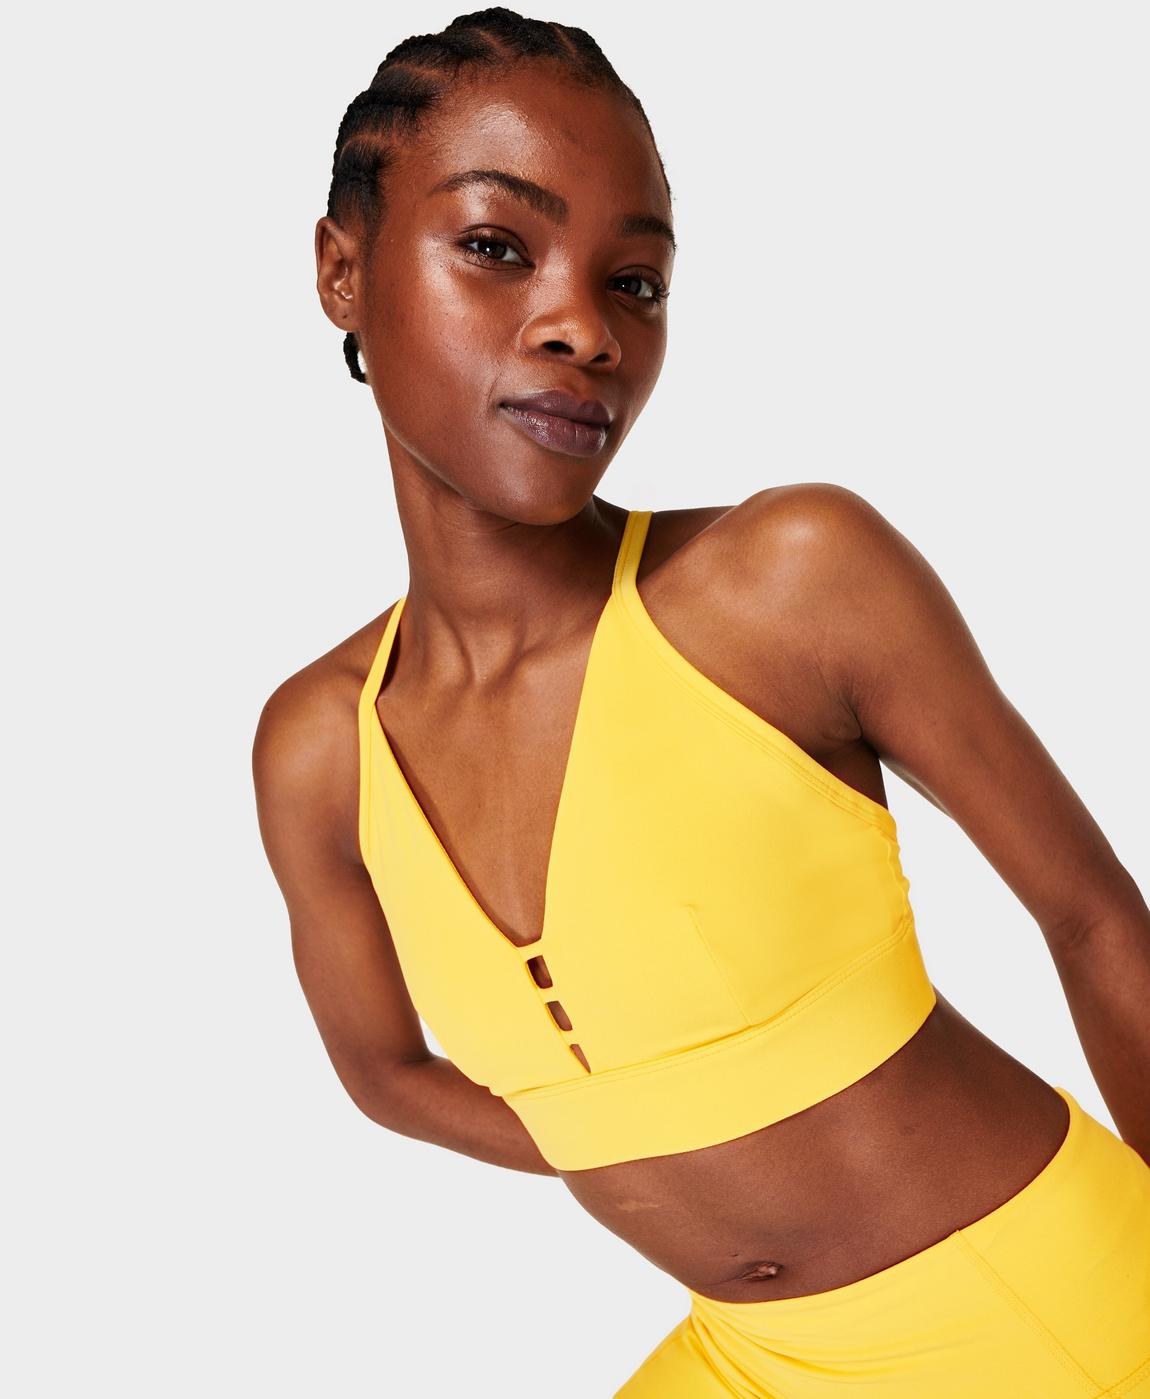 Super Soft Strappy Back Bra Colour Theory - Cheerful Yellow